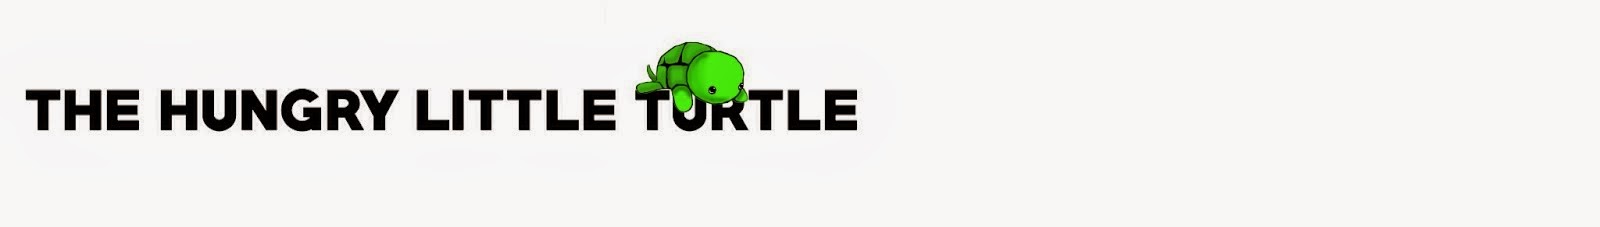 The Hungry Little Turtle